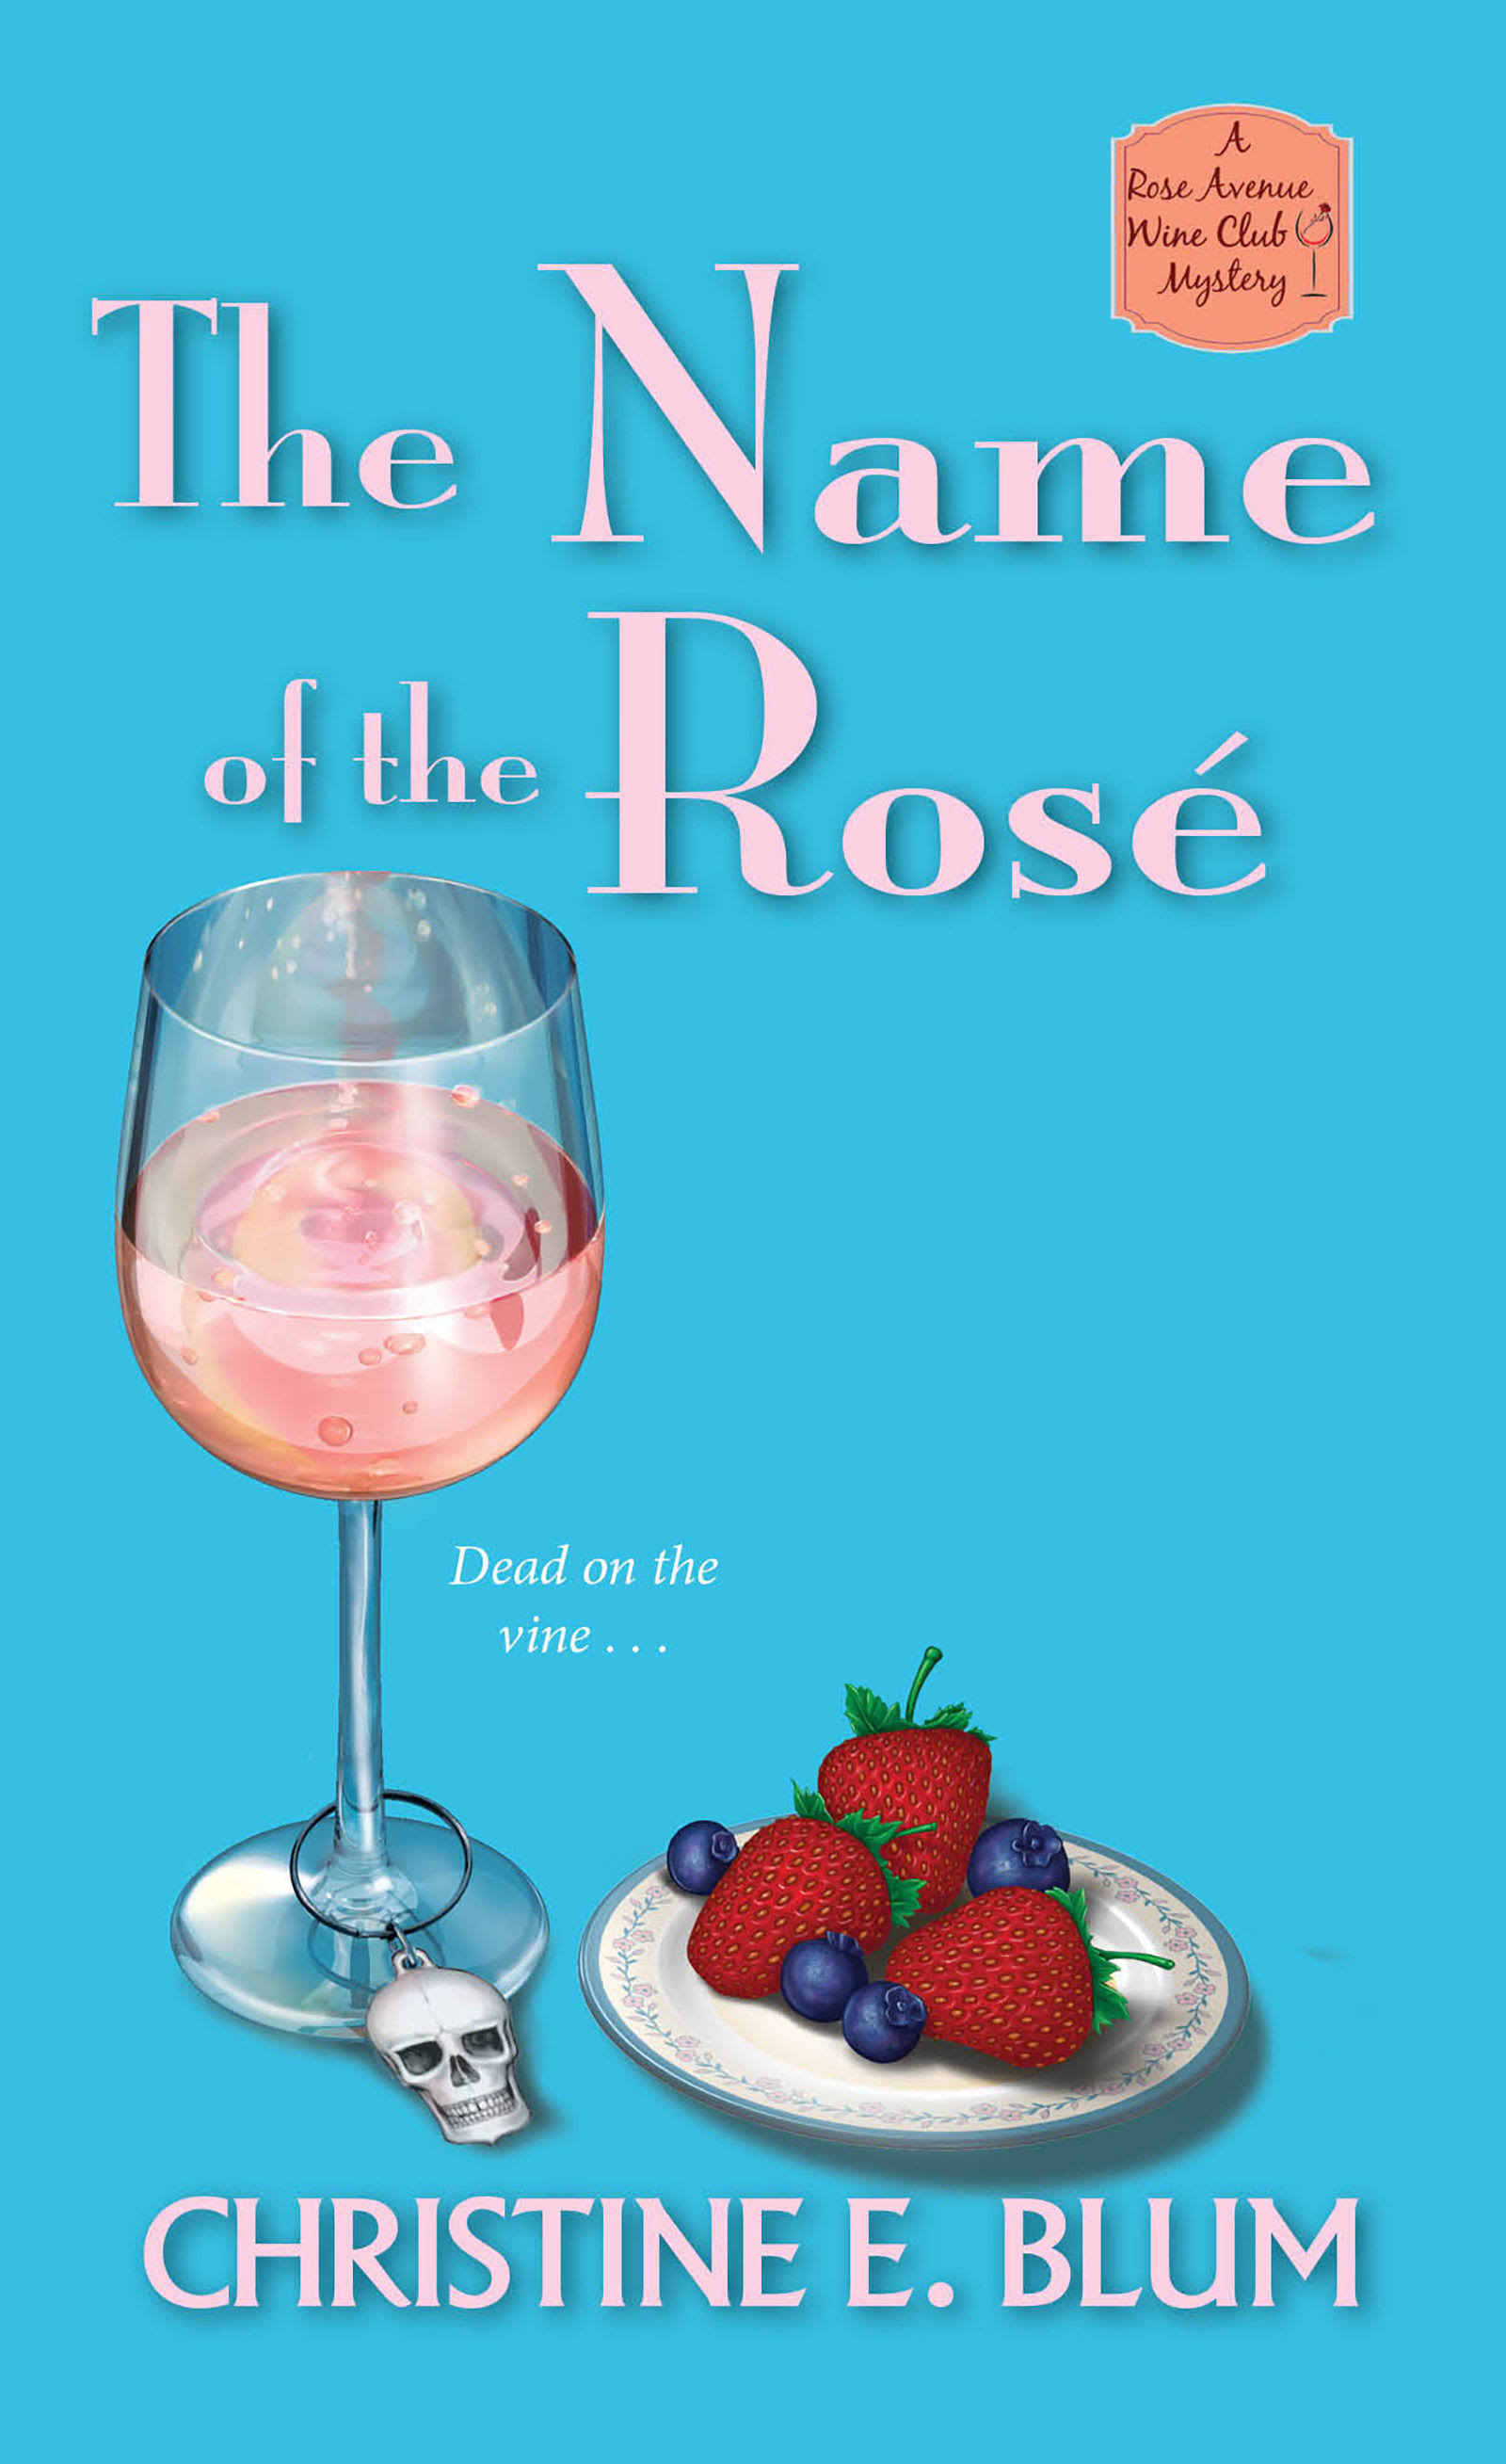 The Name of the Rosé [Book]